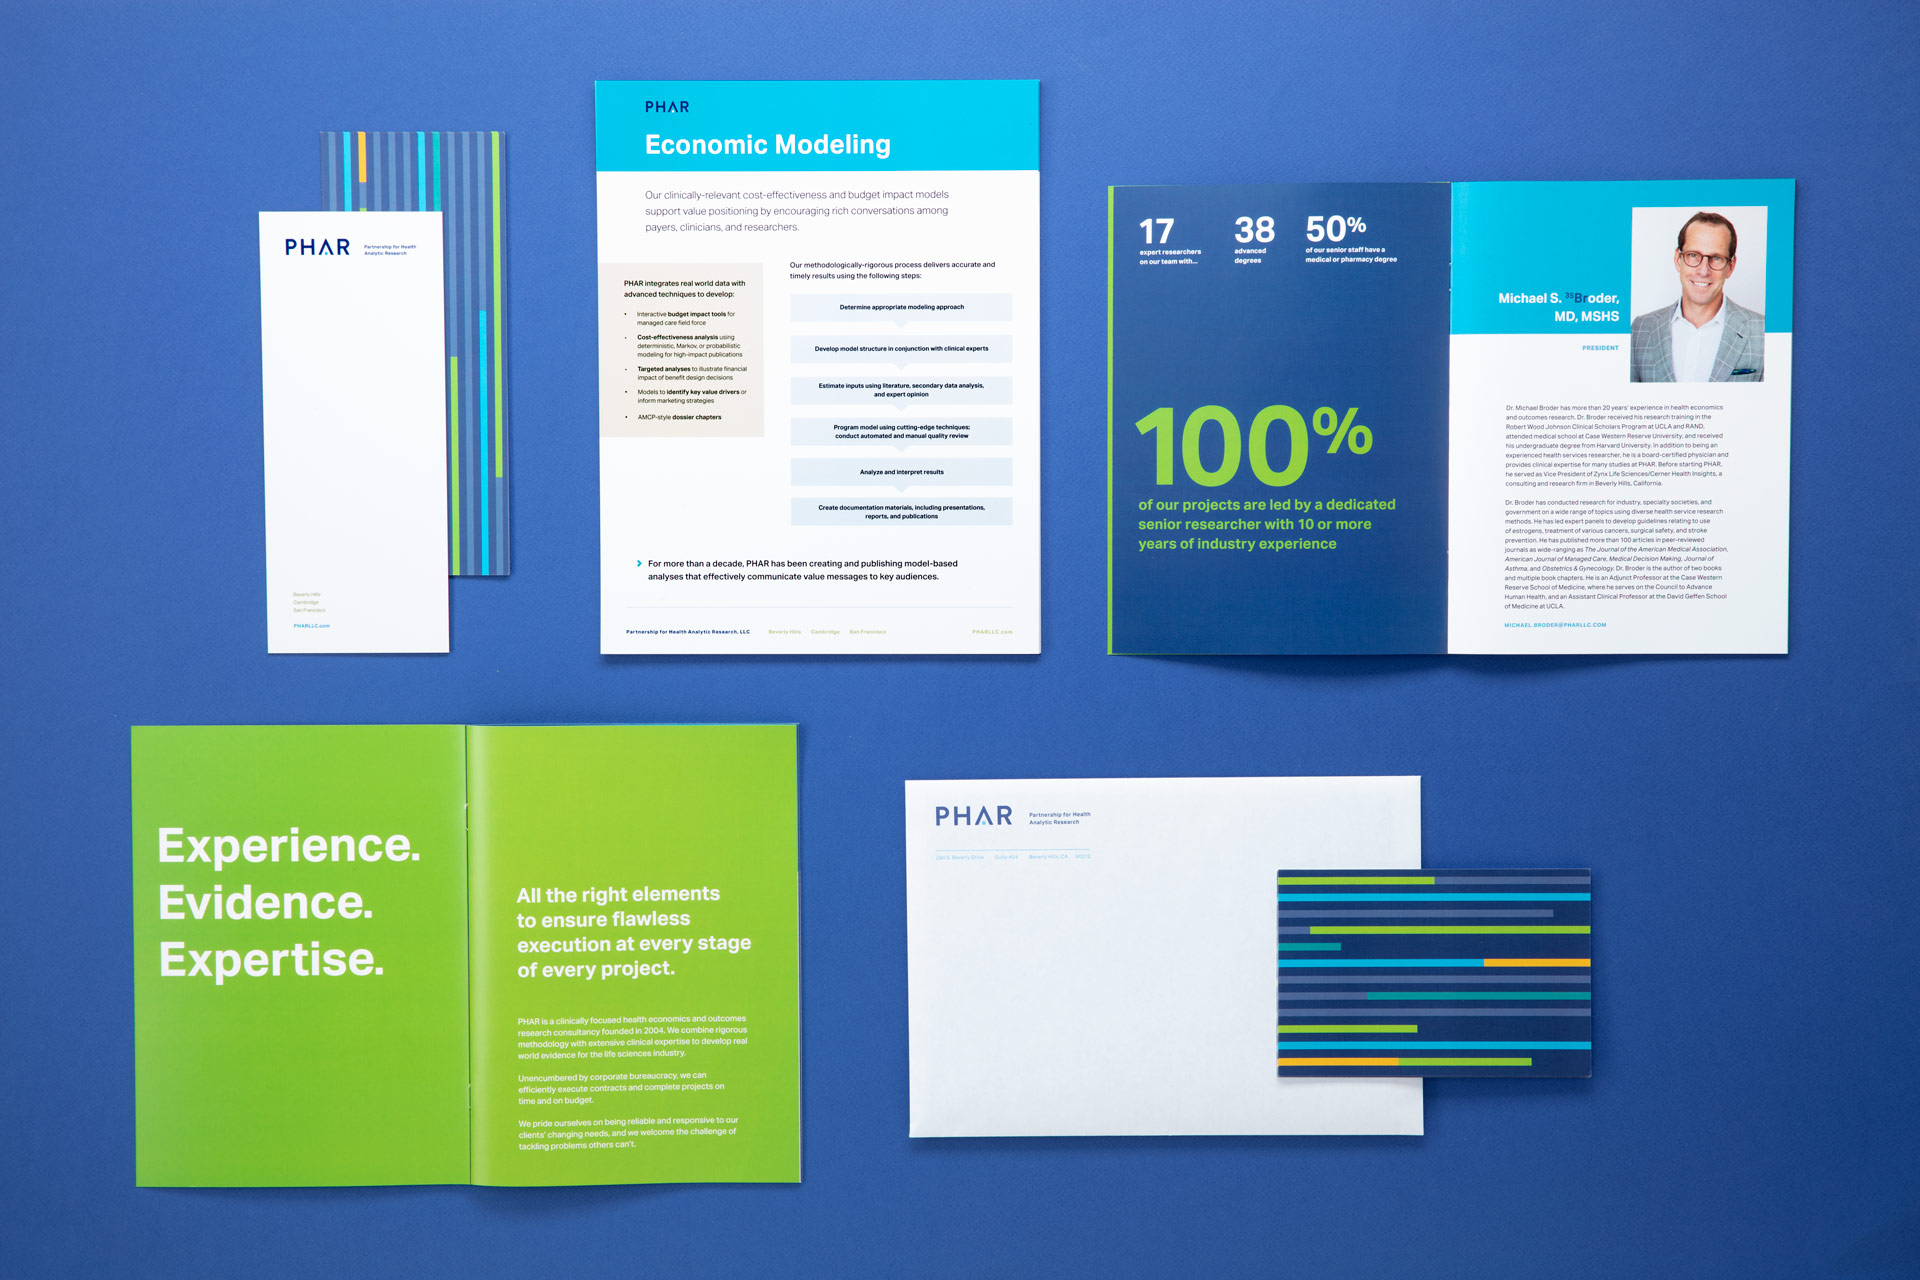 Overview of PHAR printed materials